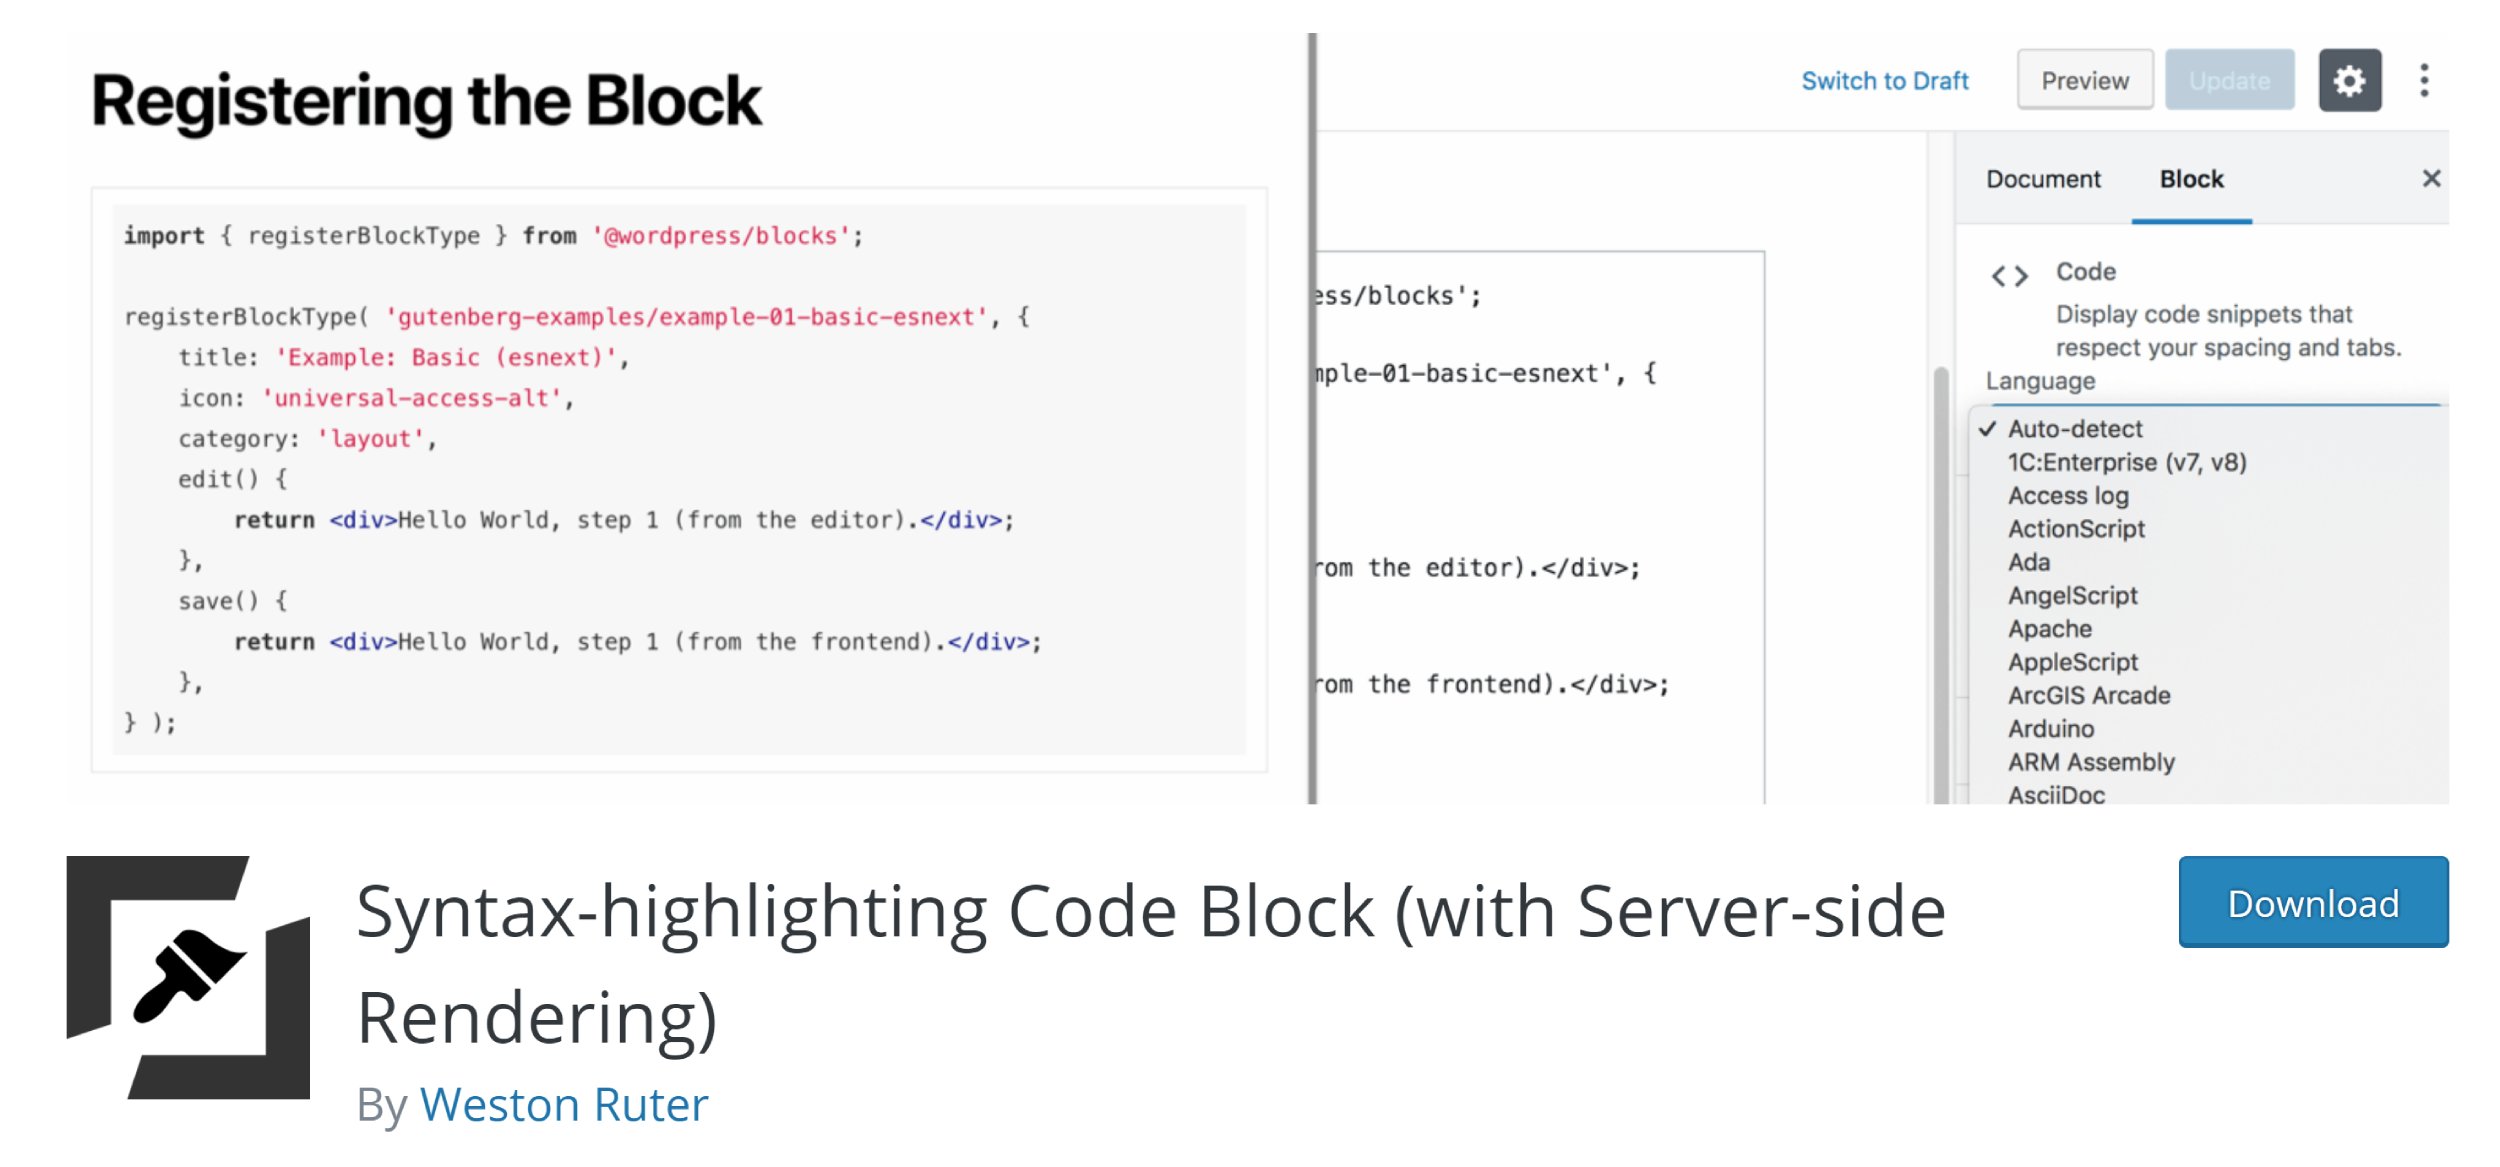 Syntax-highlighting Code Block (with Server-side Rendering)